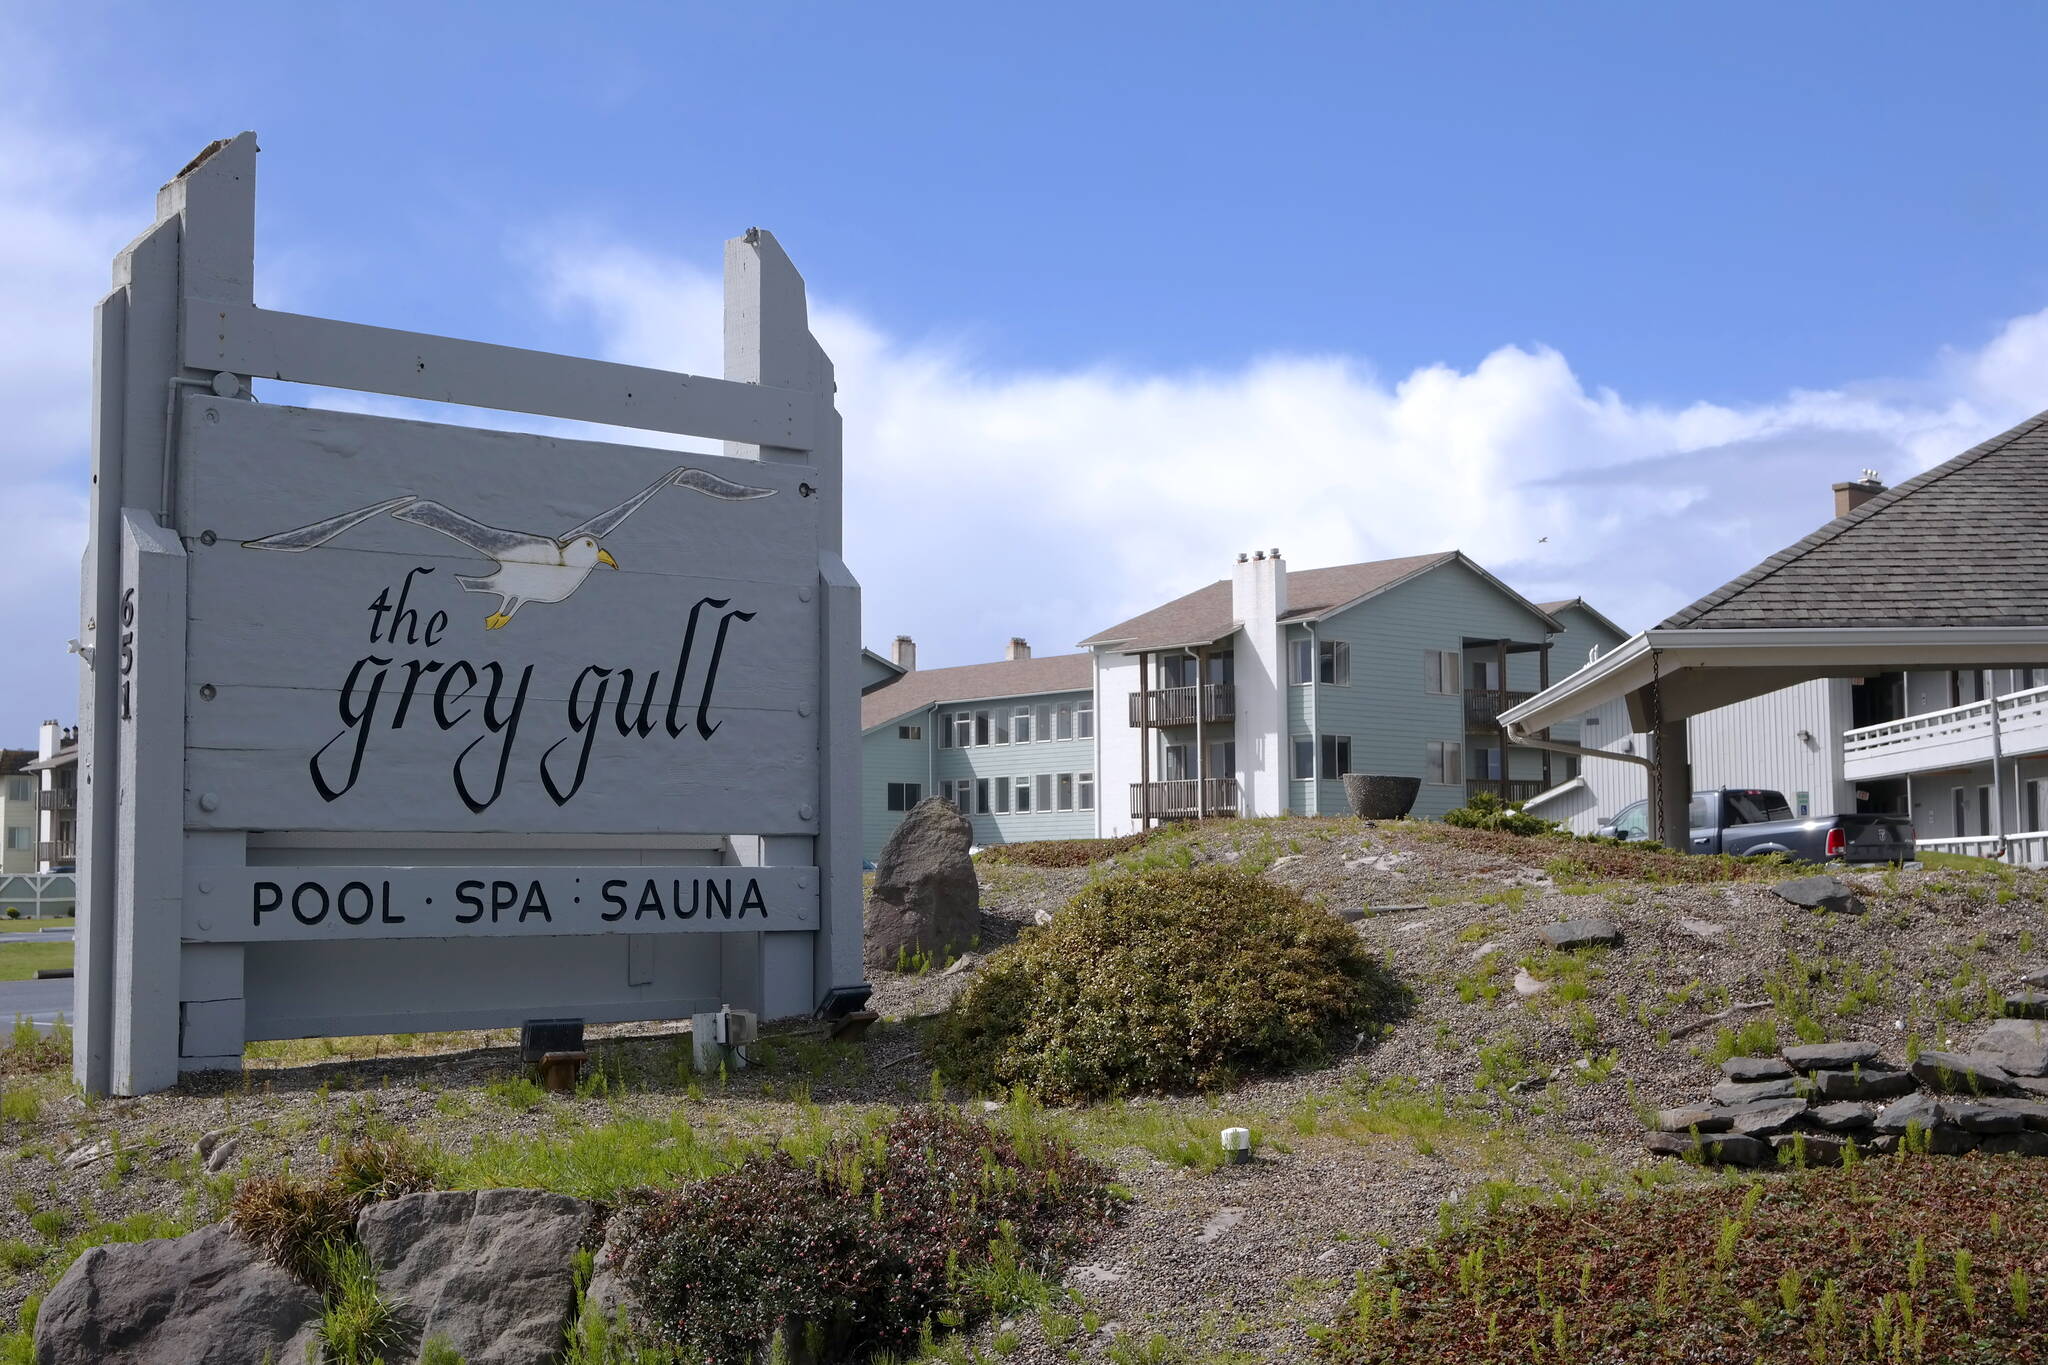 The Grey Gull, along with several other hotels on the Ocean Shores Boulevard strip, is a member of the Ocean Shores Hotel Coalition. The coalition is in favor of strict term limits on the Lodging Tax Advisory Committee to encourage turnover and allow for a variety of hotelier voices. The committee dedicates to position for businesses upon which the lodging tax is levied. Erika Gebhardt I The Daily World